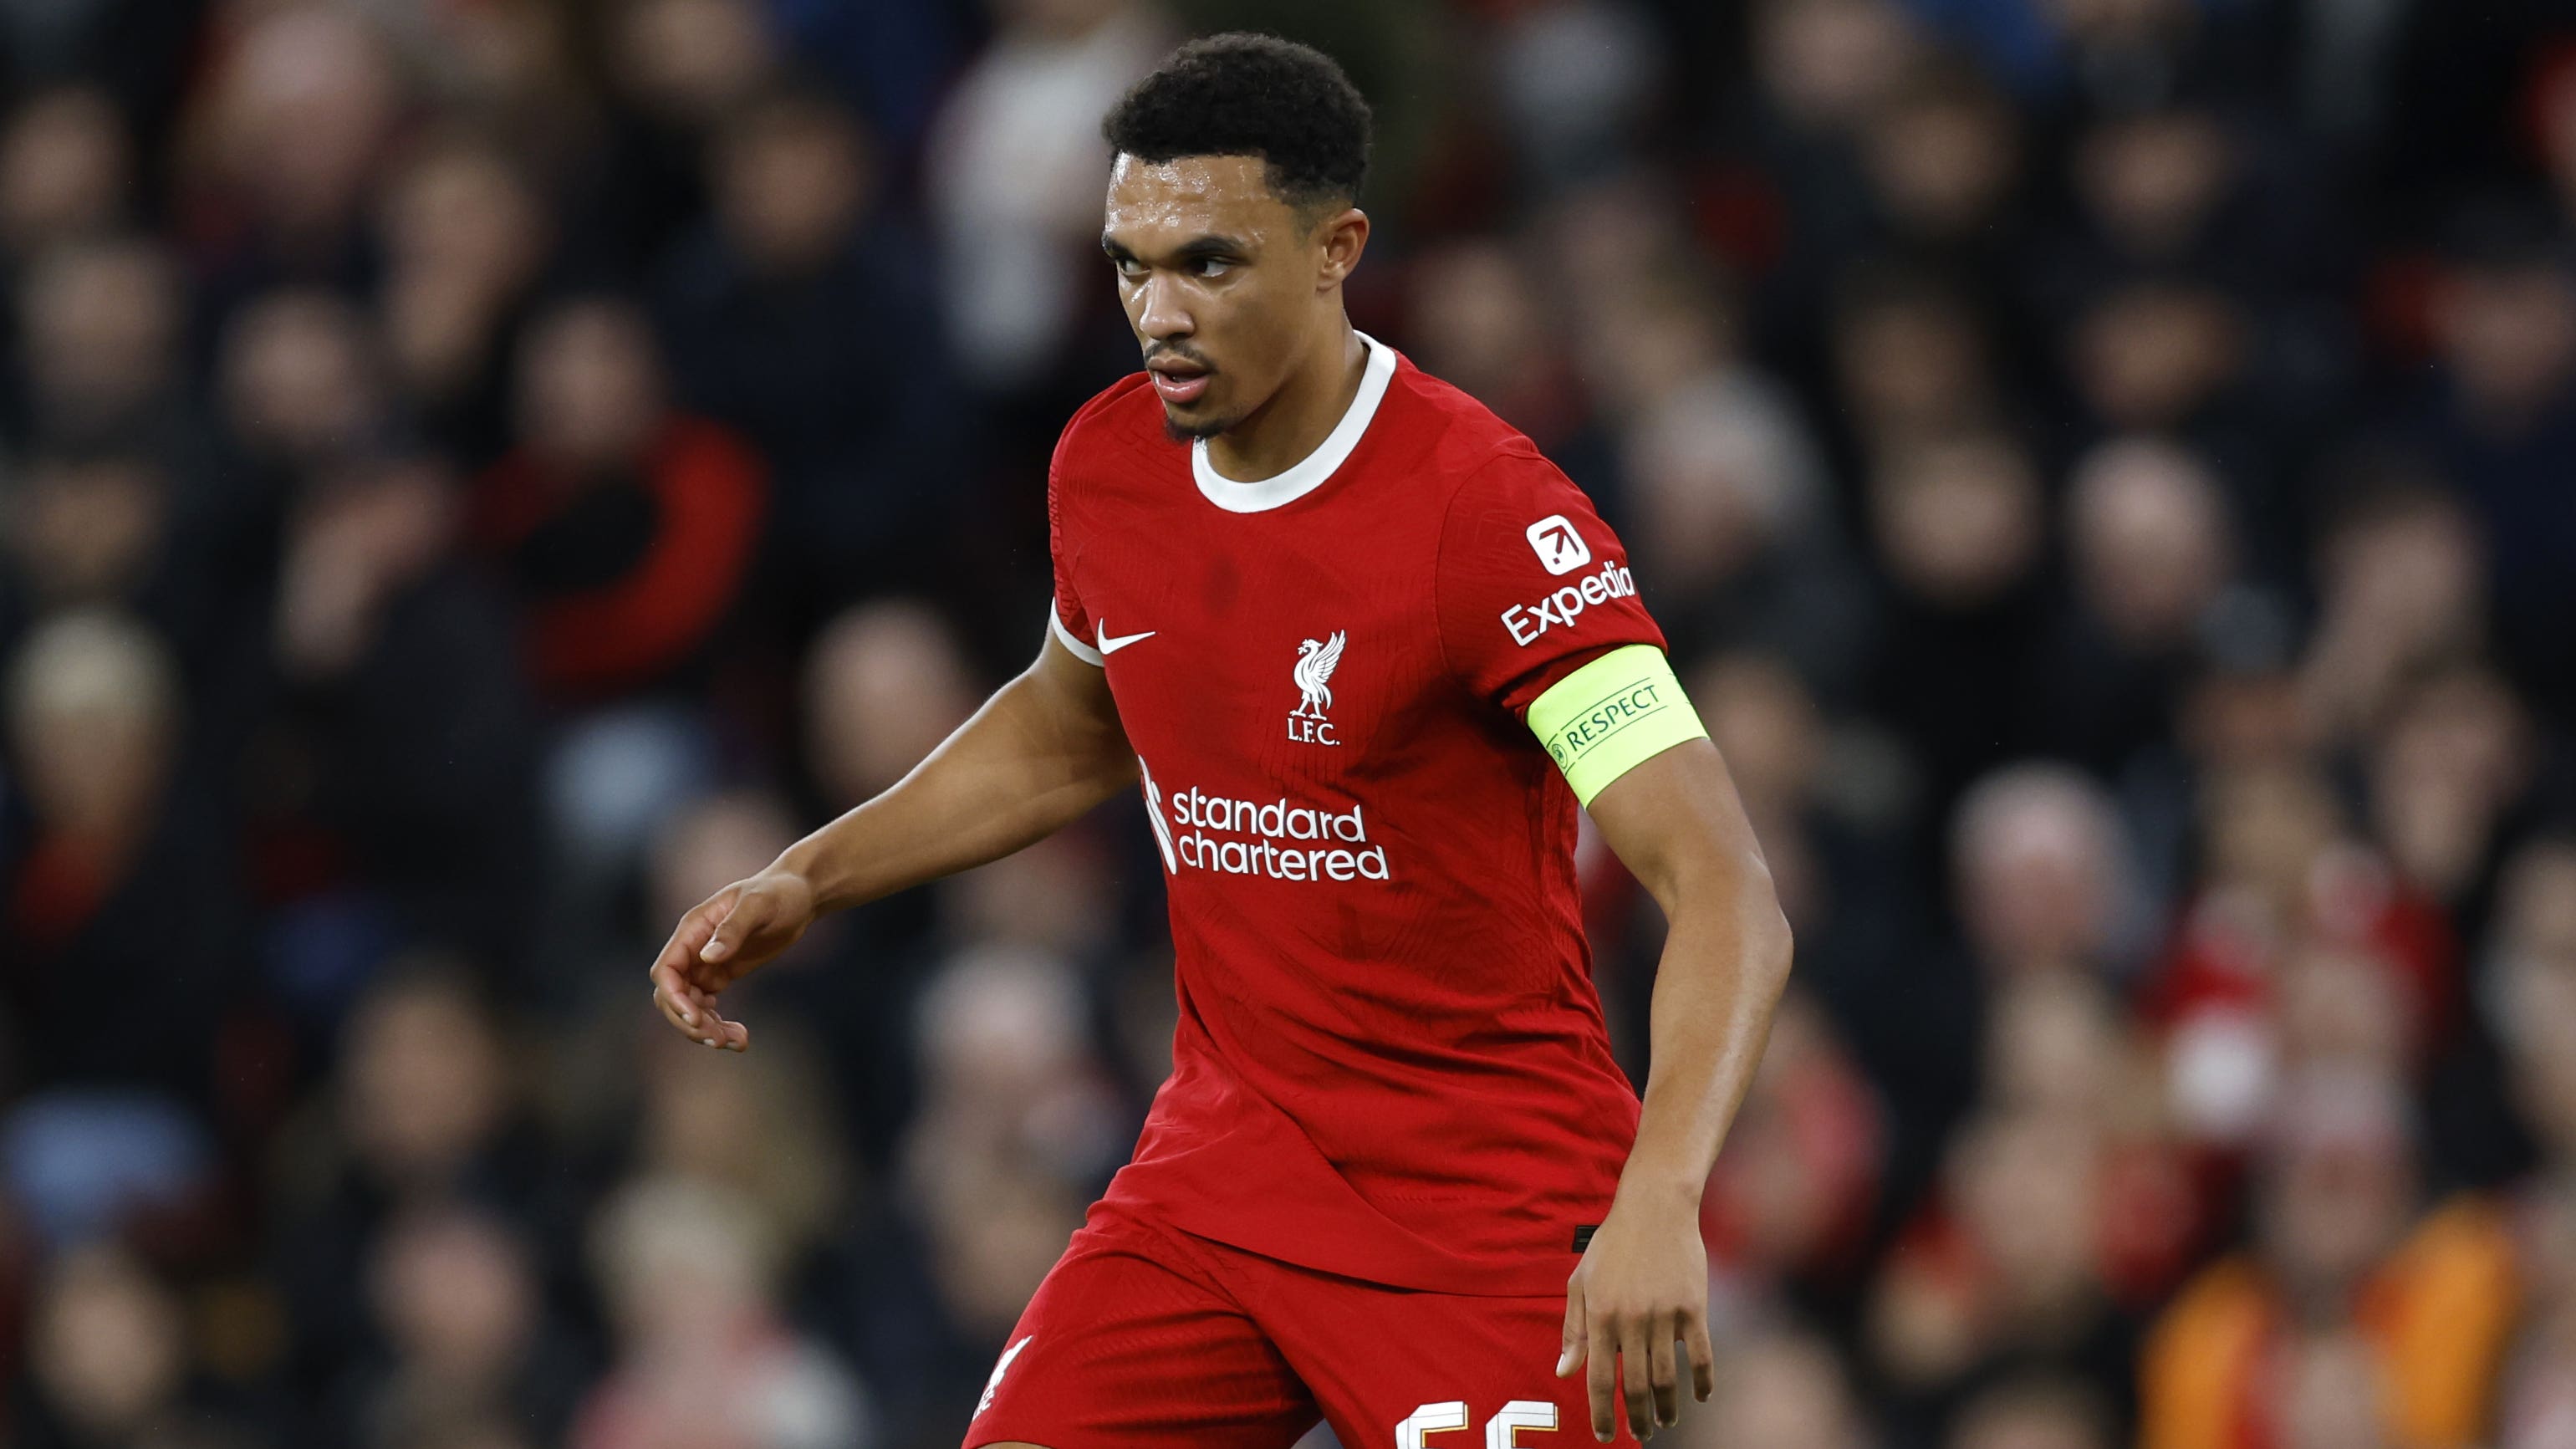 Jurgen Klopp admits Trent Alexander-Arnold may be the middle man Liverpool need